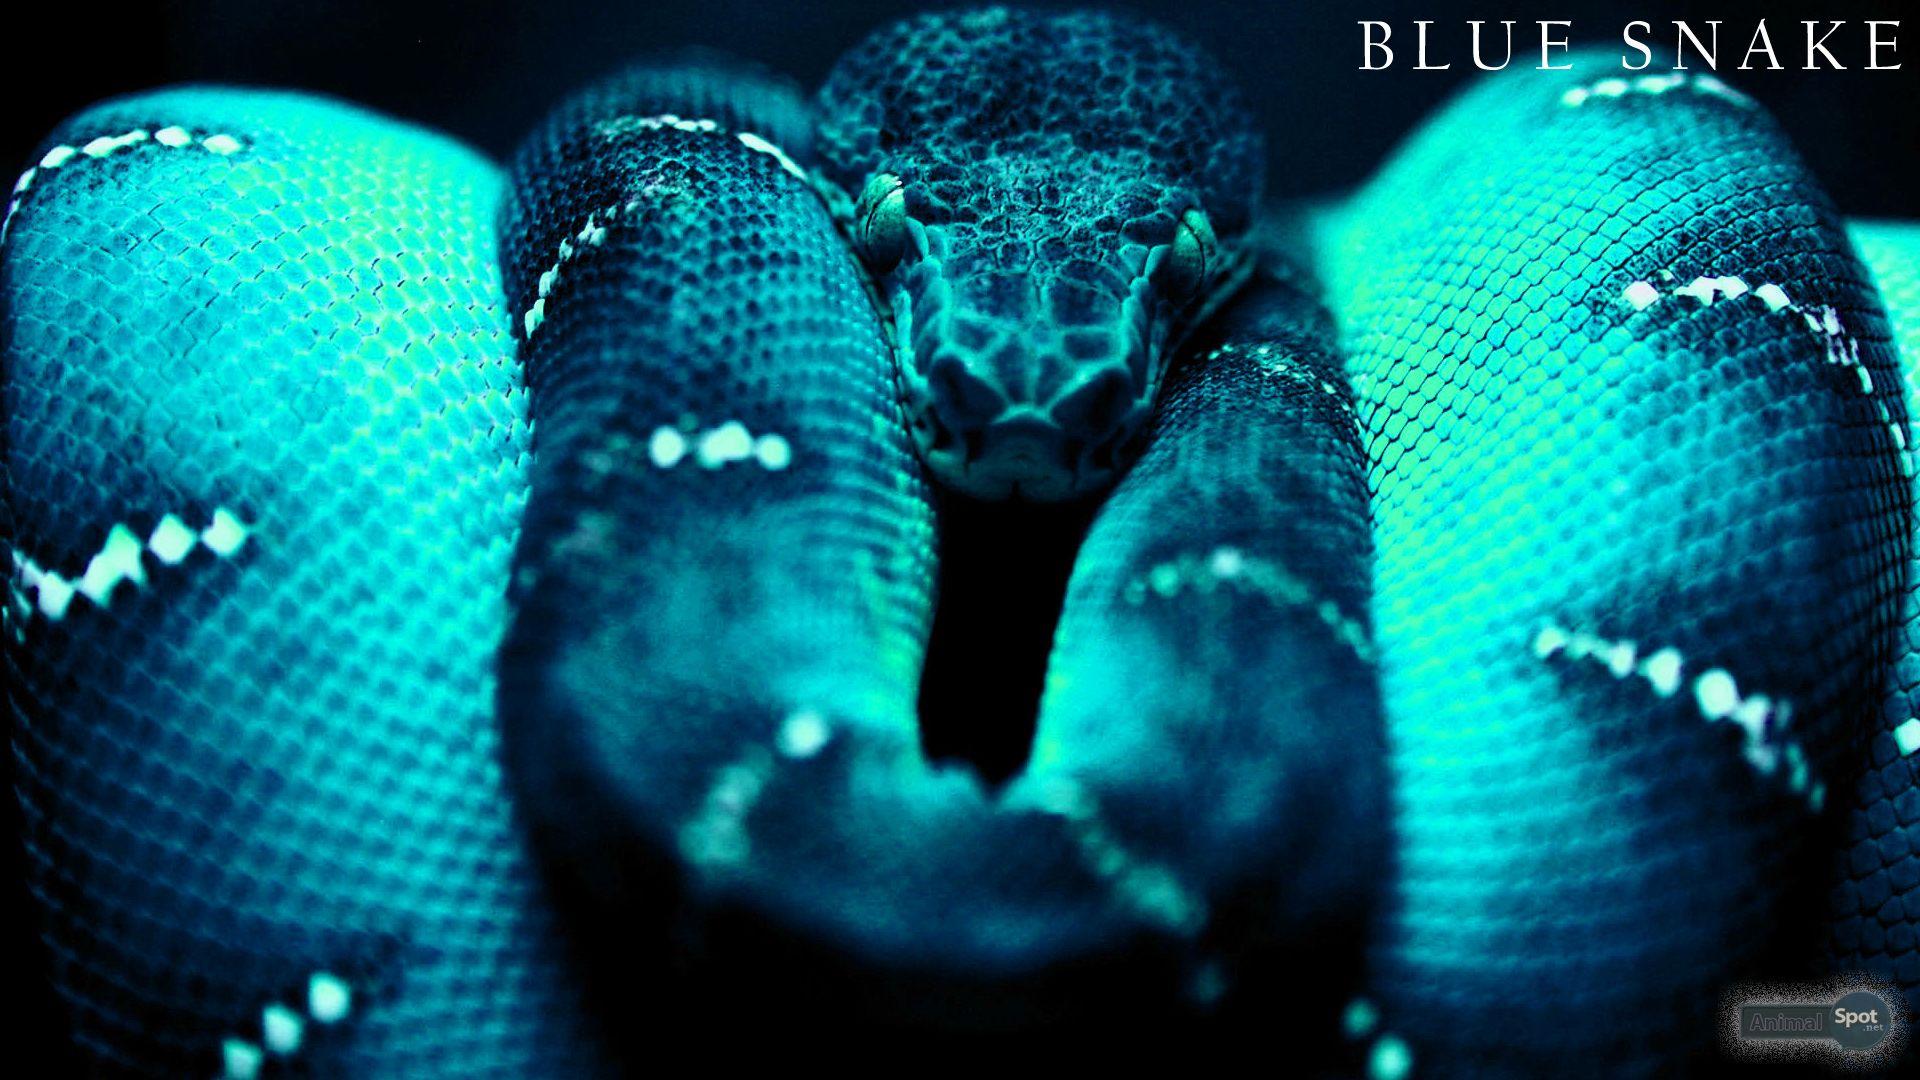 Blue snake viper eyes 640x1136 iPhone 55S5CSE wallpaper background  picture image